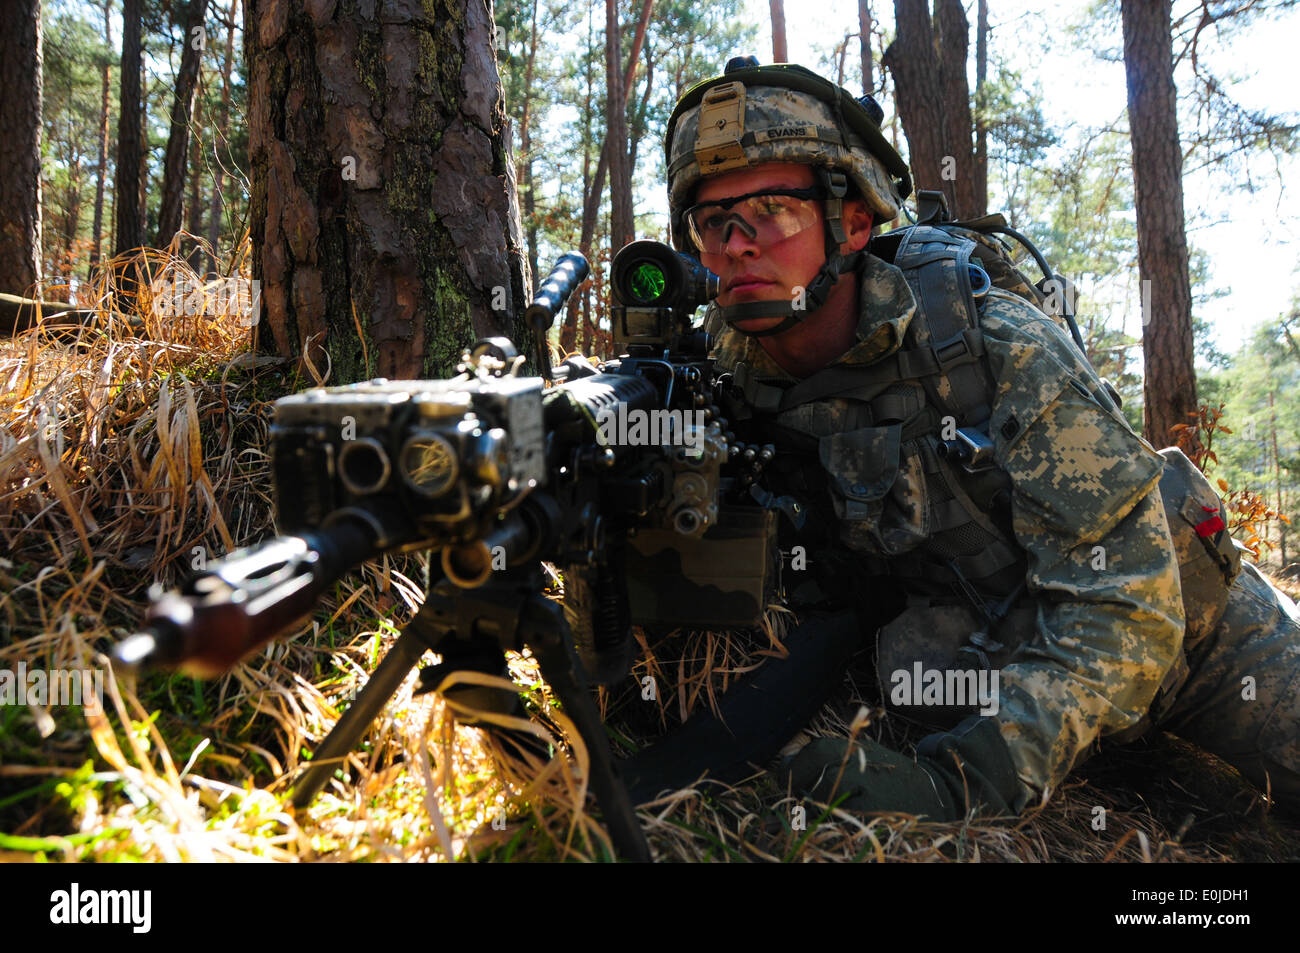 U.S. Army Spc. Dylan Evans, 2nd Battalion, 503rd Infantry Regiment, 173rd Airborne Brigade Combat Team (ABCT), pulls security d Stock Photo